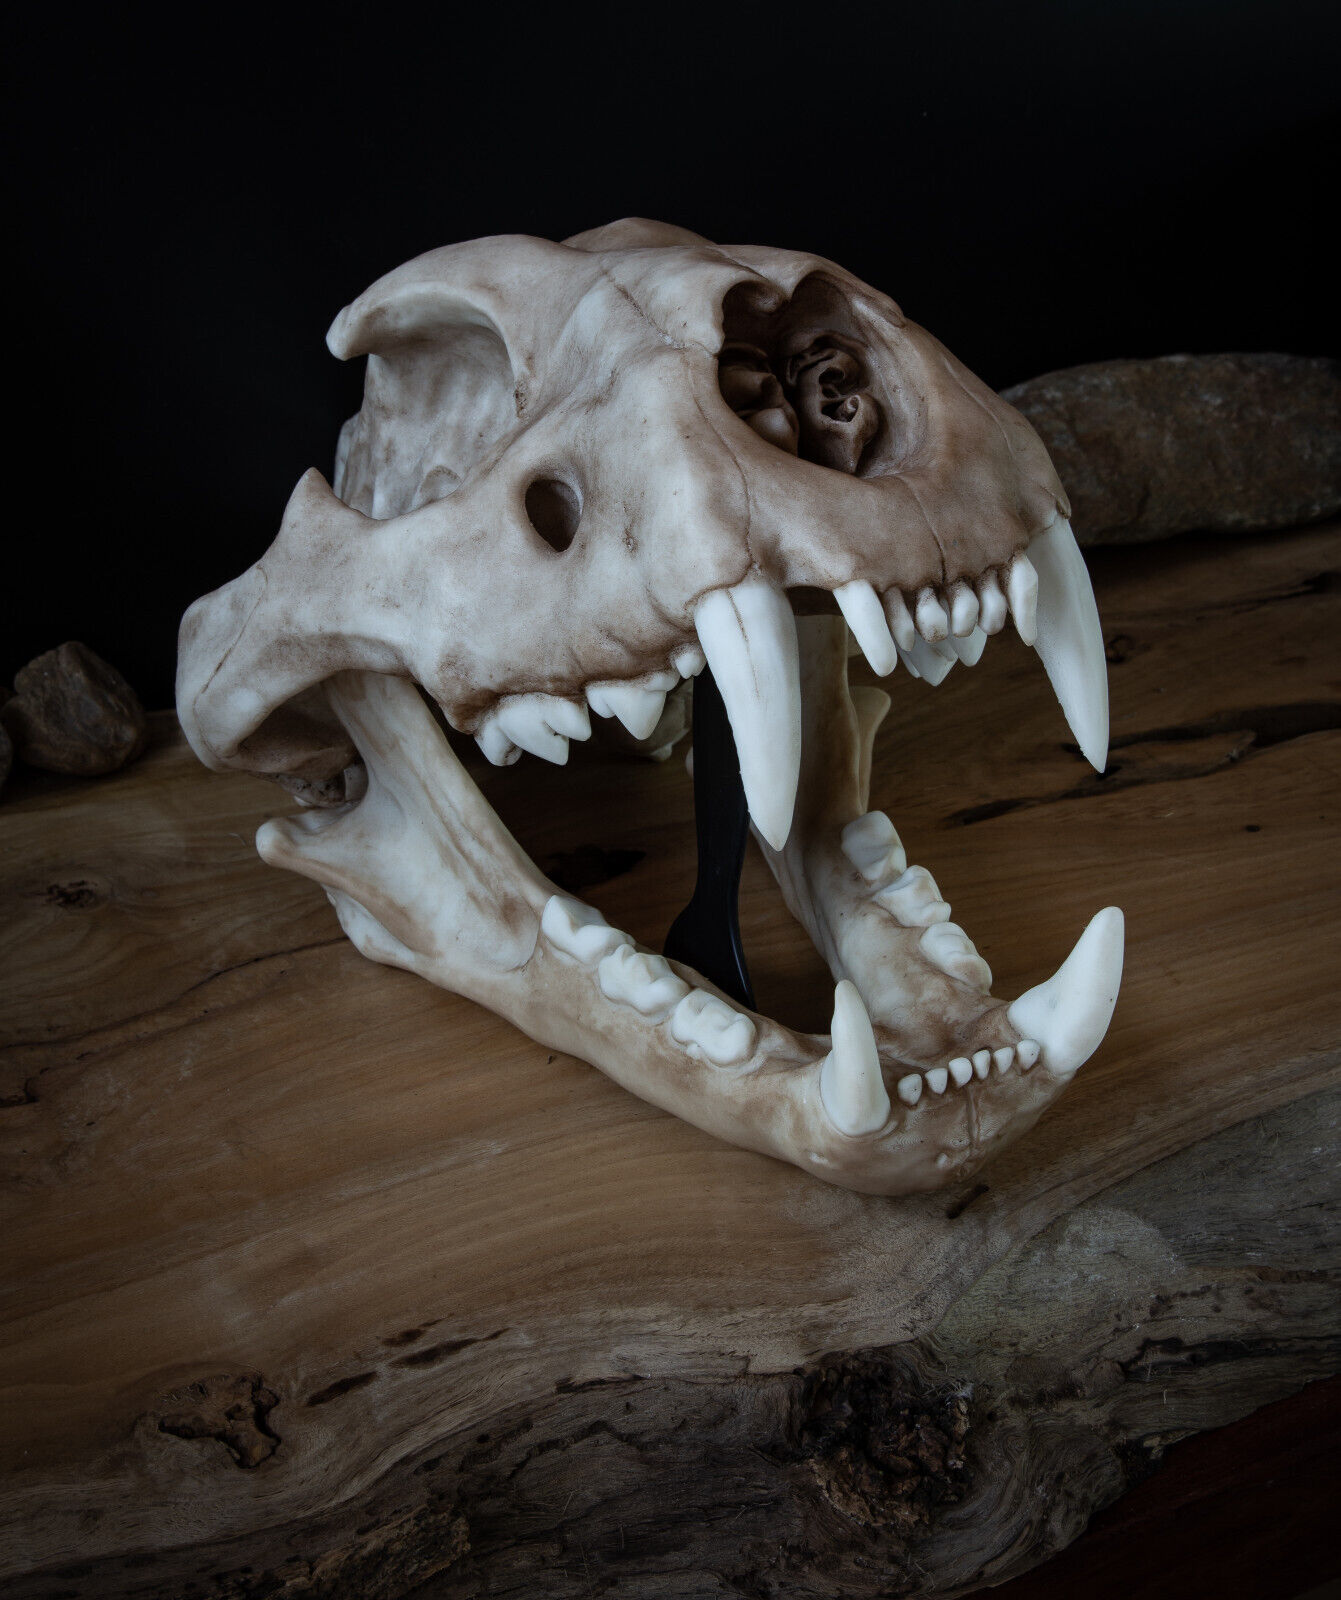 Lion Skull - Large Adult - high quality replica - FREE world wide shipping.